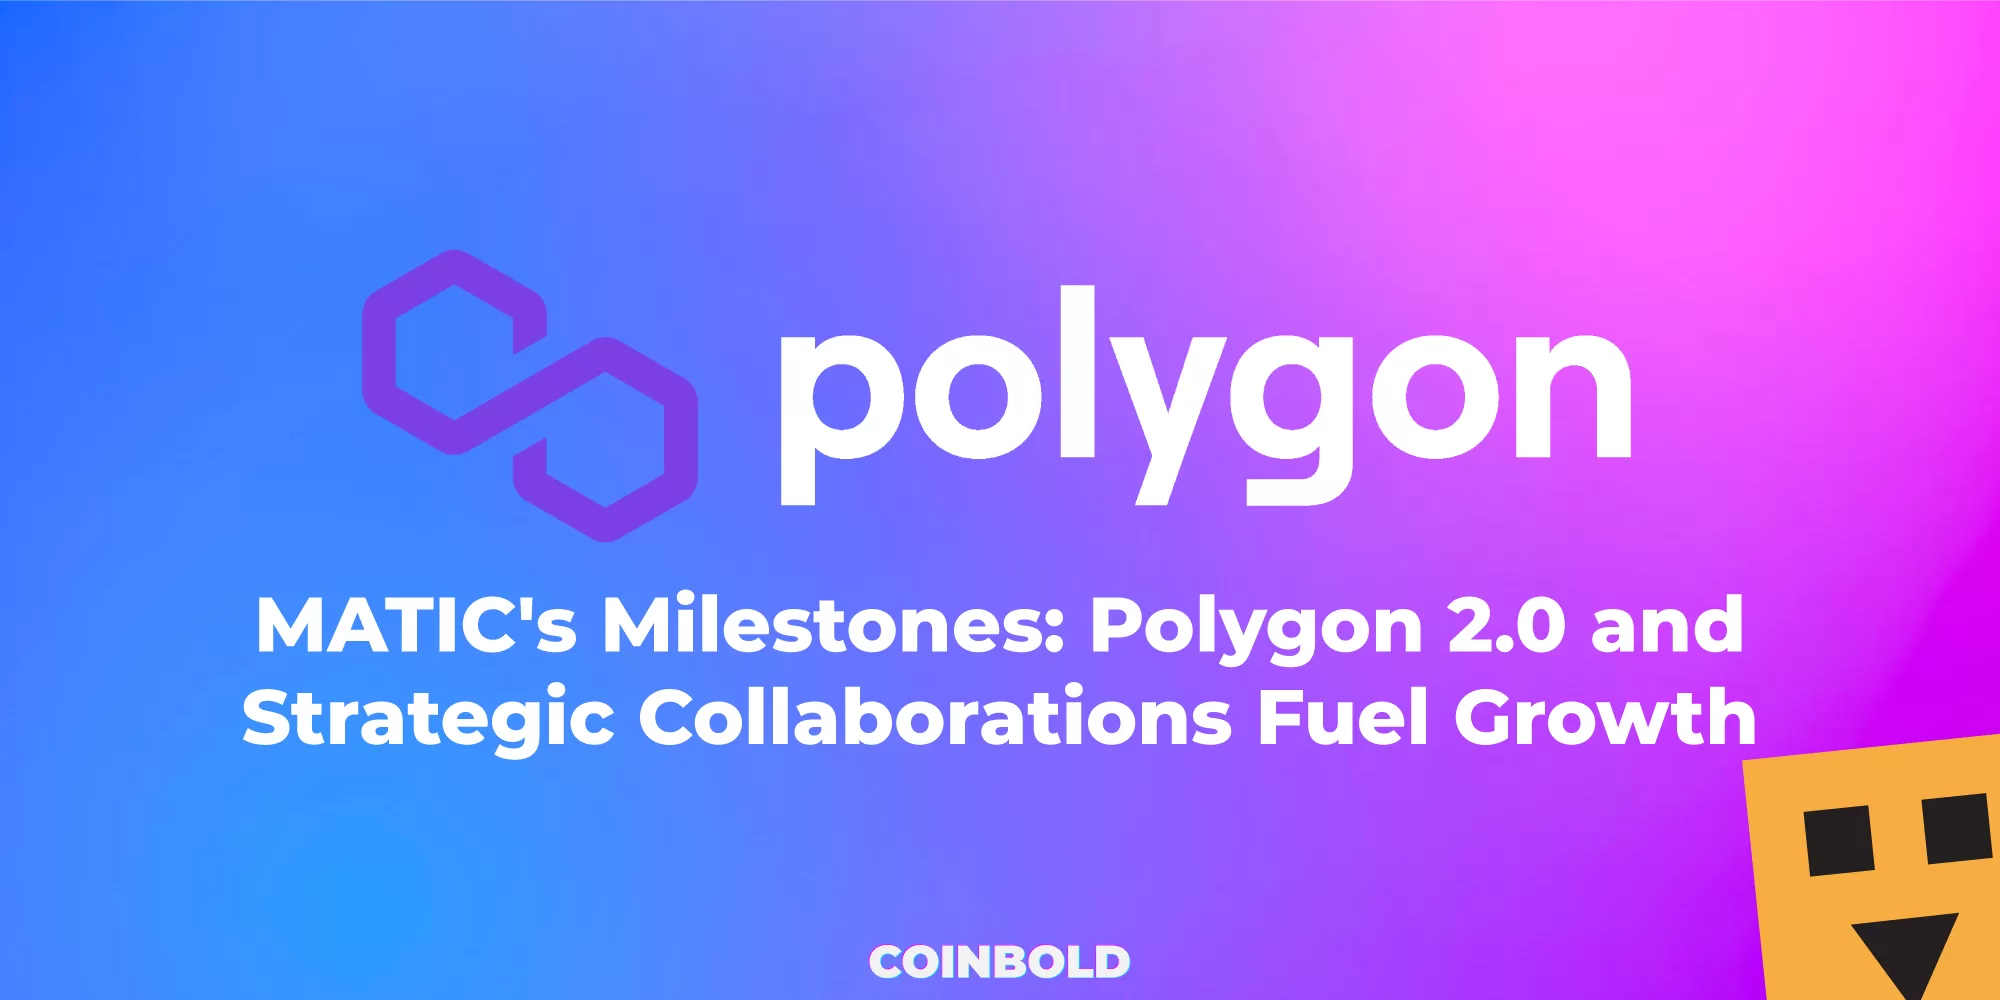 MATIC's Milestones: Polygon 2.0 and Strategic Collaborations Fuel Growth